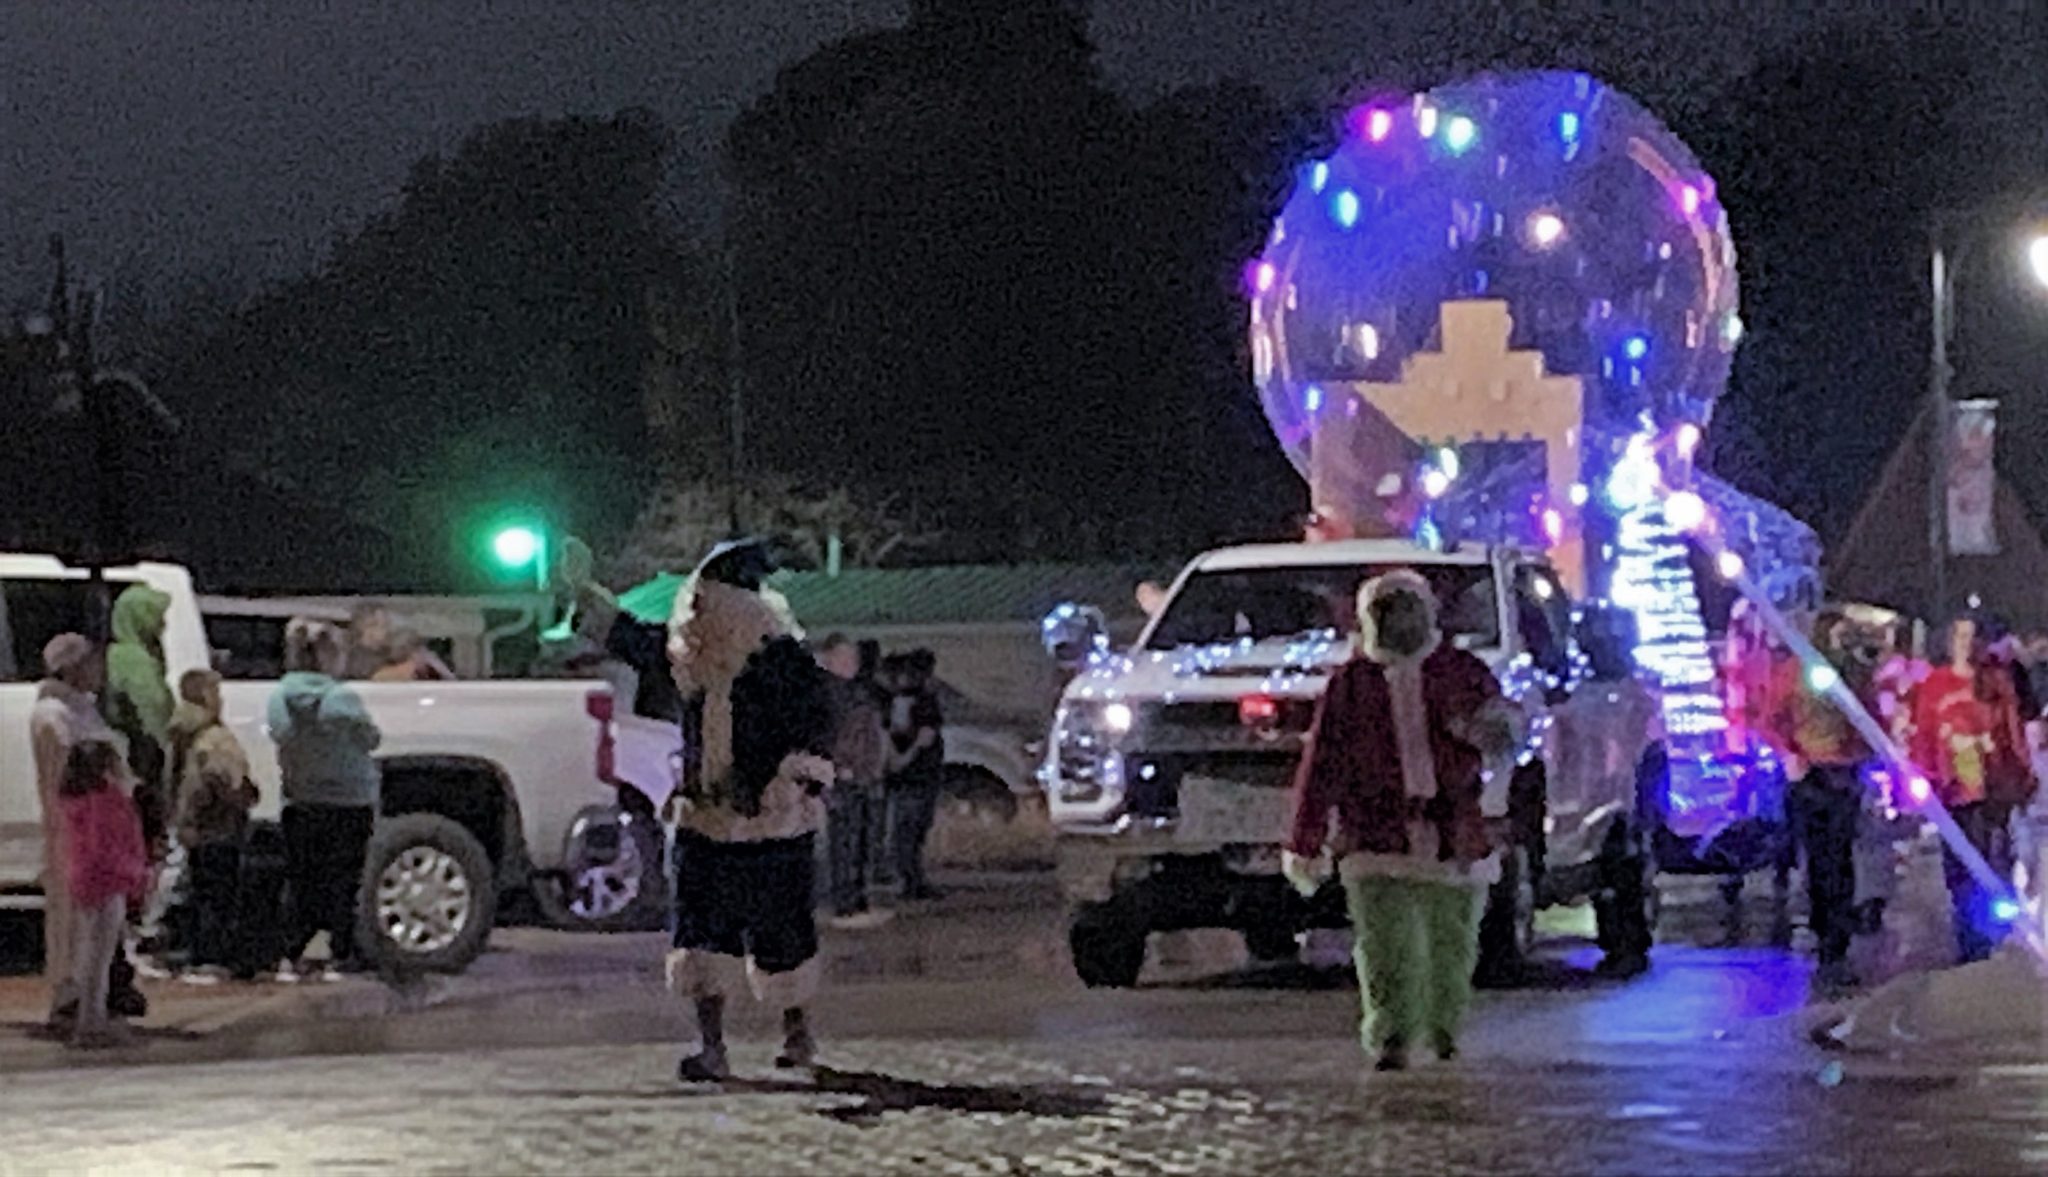 Sulphur Springs Lit Up With Holiday Cheer For Annual Christmas Parade